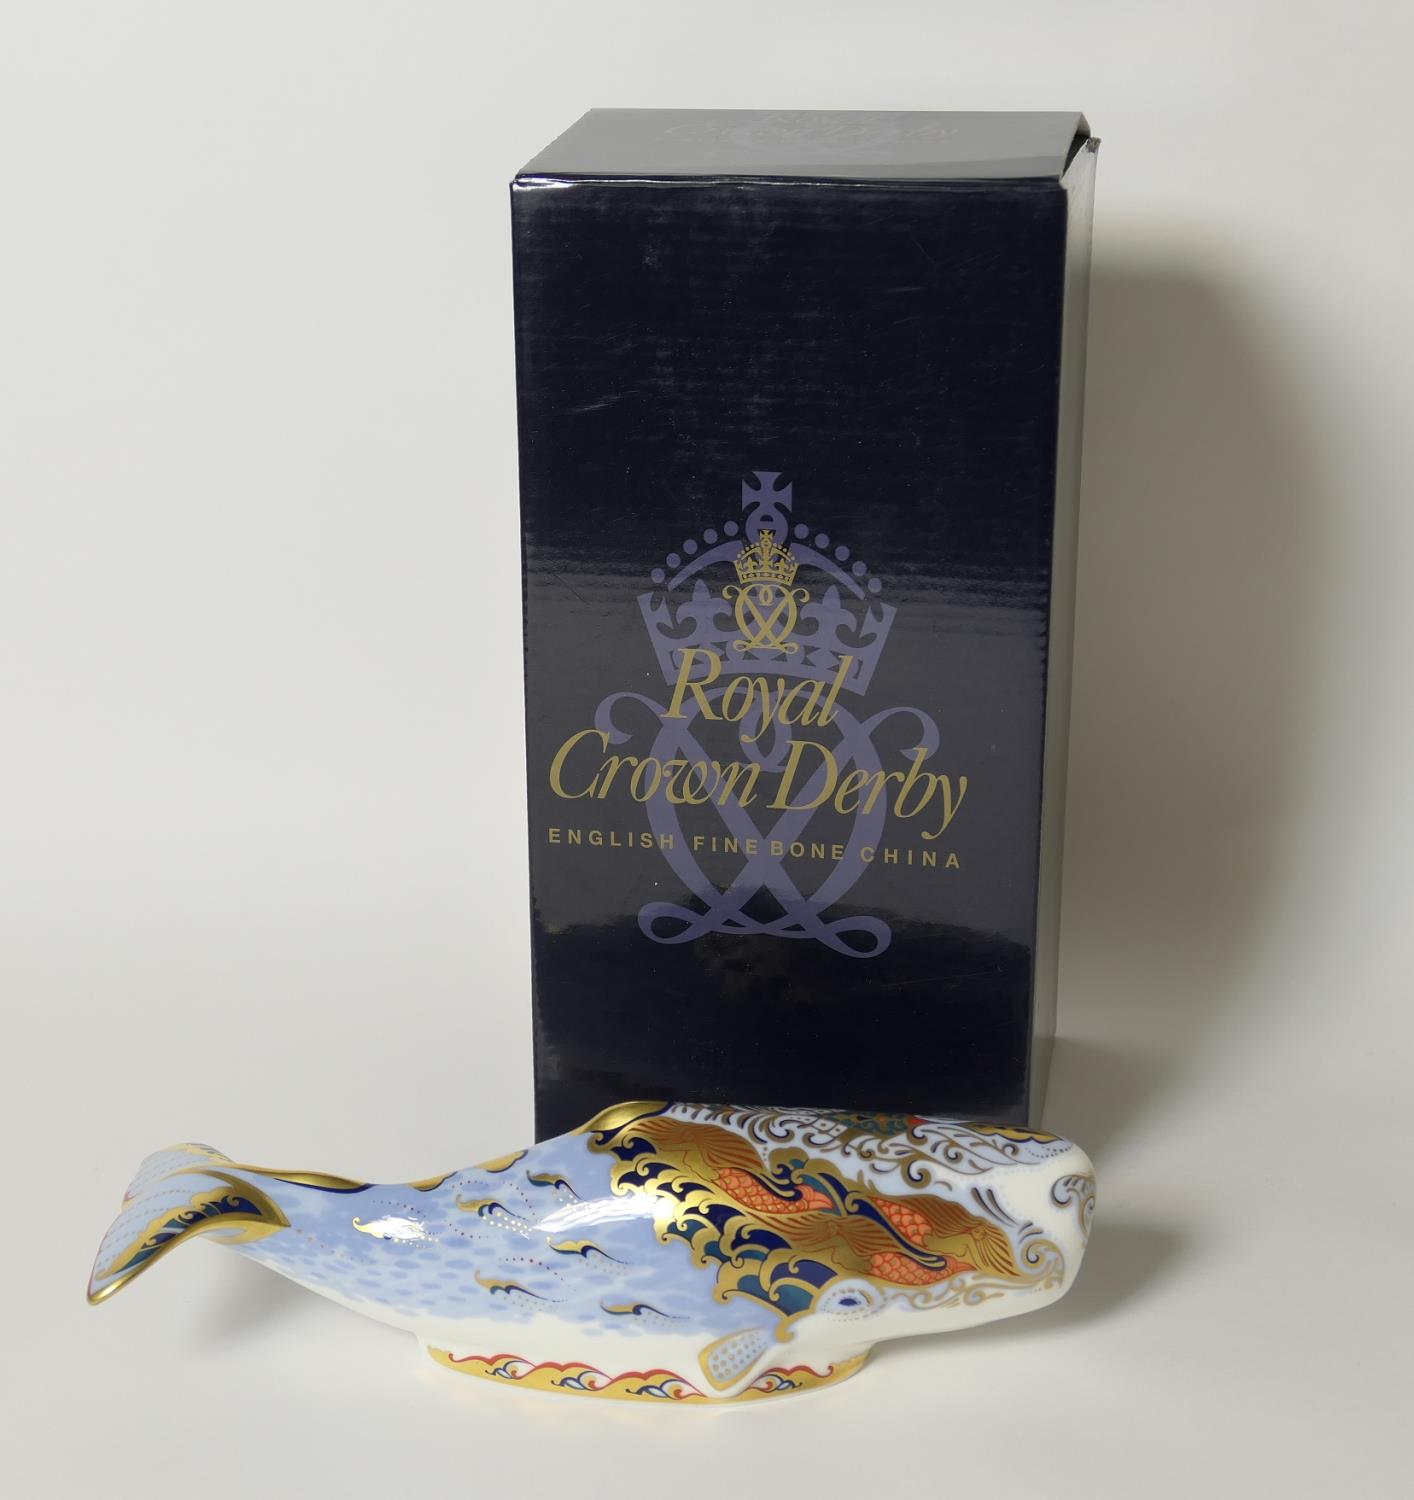 Royal Crown Derby Oceanic Whale paperweight, circa 2004, produced exclusively for The Royal Crown